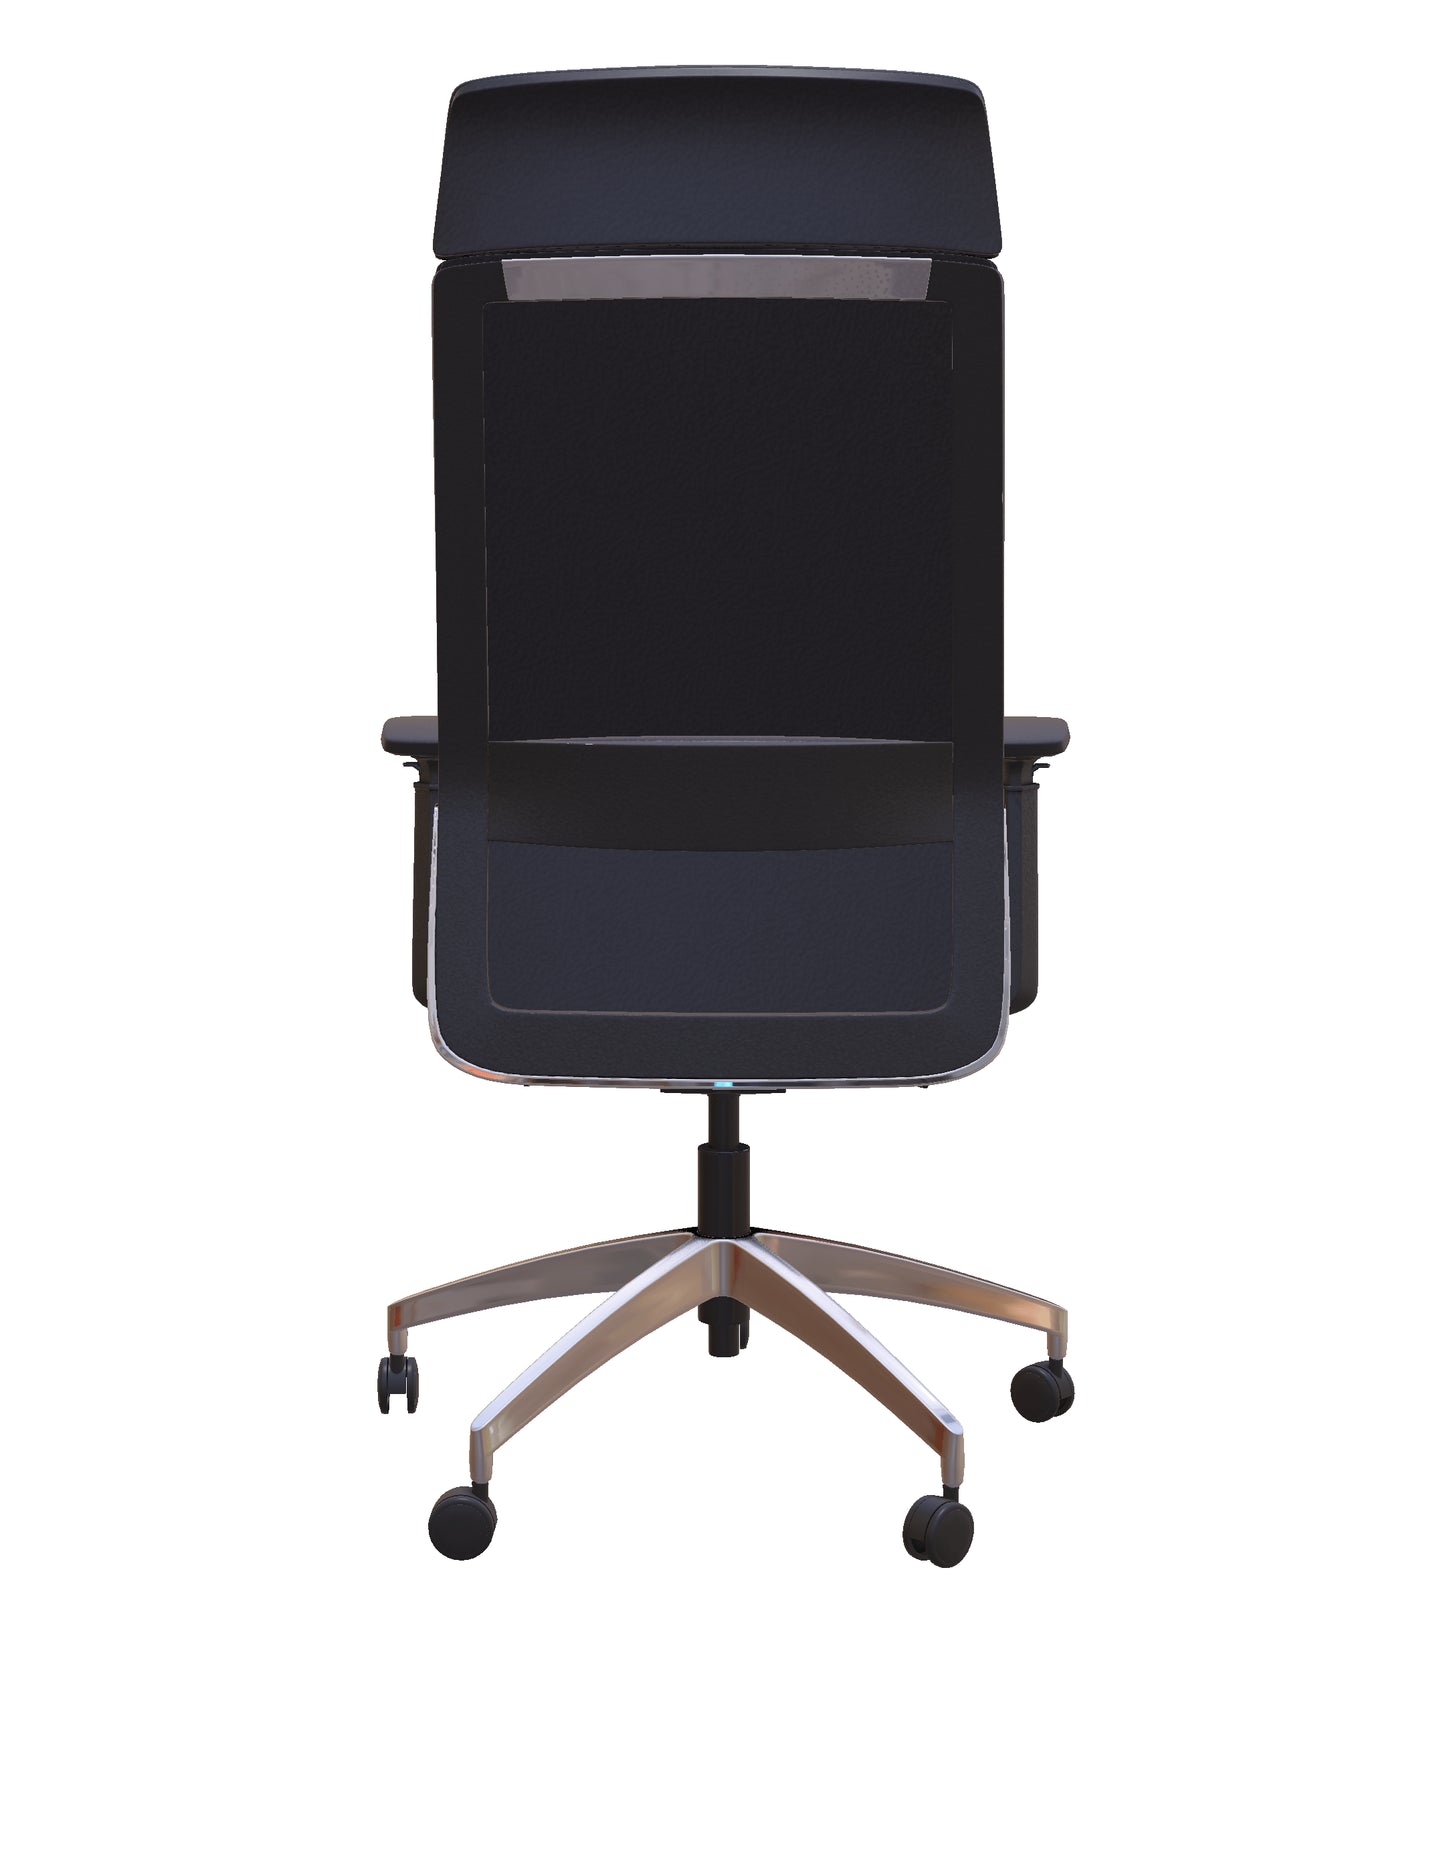 Freeride Executive High-Back Leather Office Chair